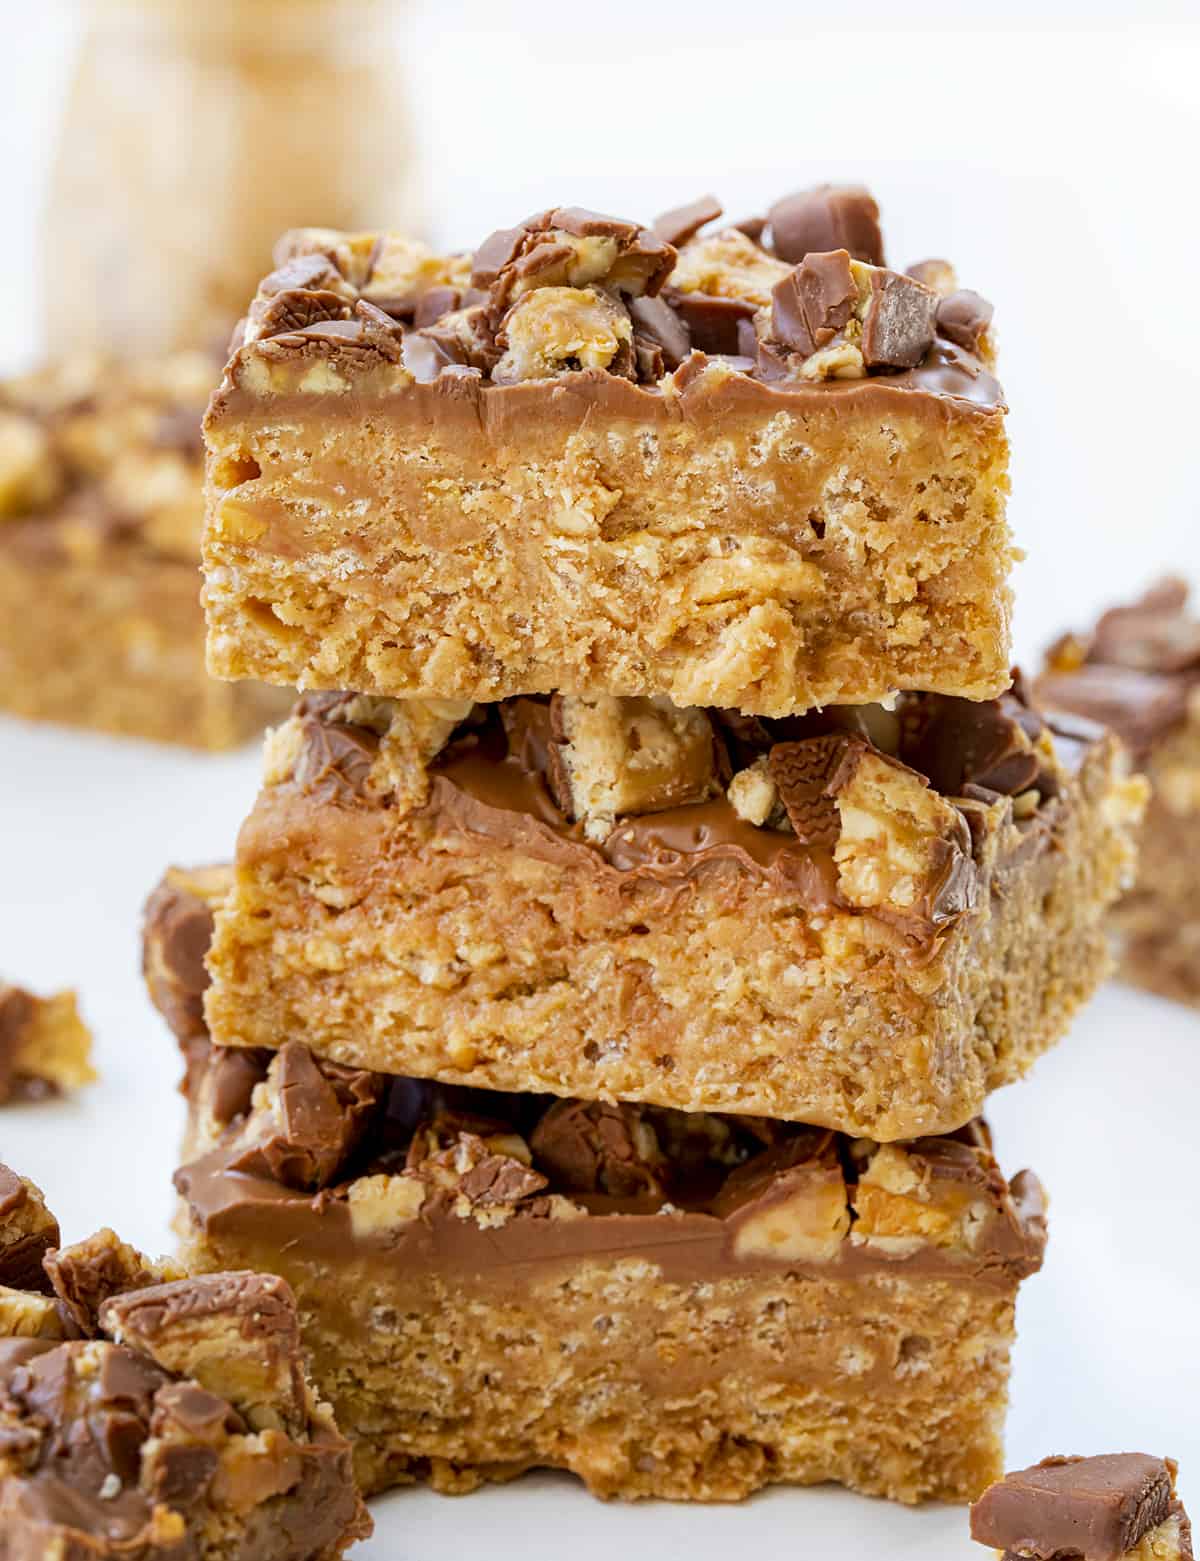 Snickers Special K Bars Stacked. Dessert, Scootchero Bars, SpecialK Bars, bars, bar recipes, scootch-er-oo bars, snicekrs bars, kid snacks, chocolate, peanut butter, butterscotch, recipes, i am baker, iambaker.